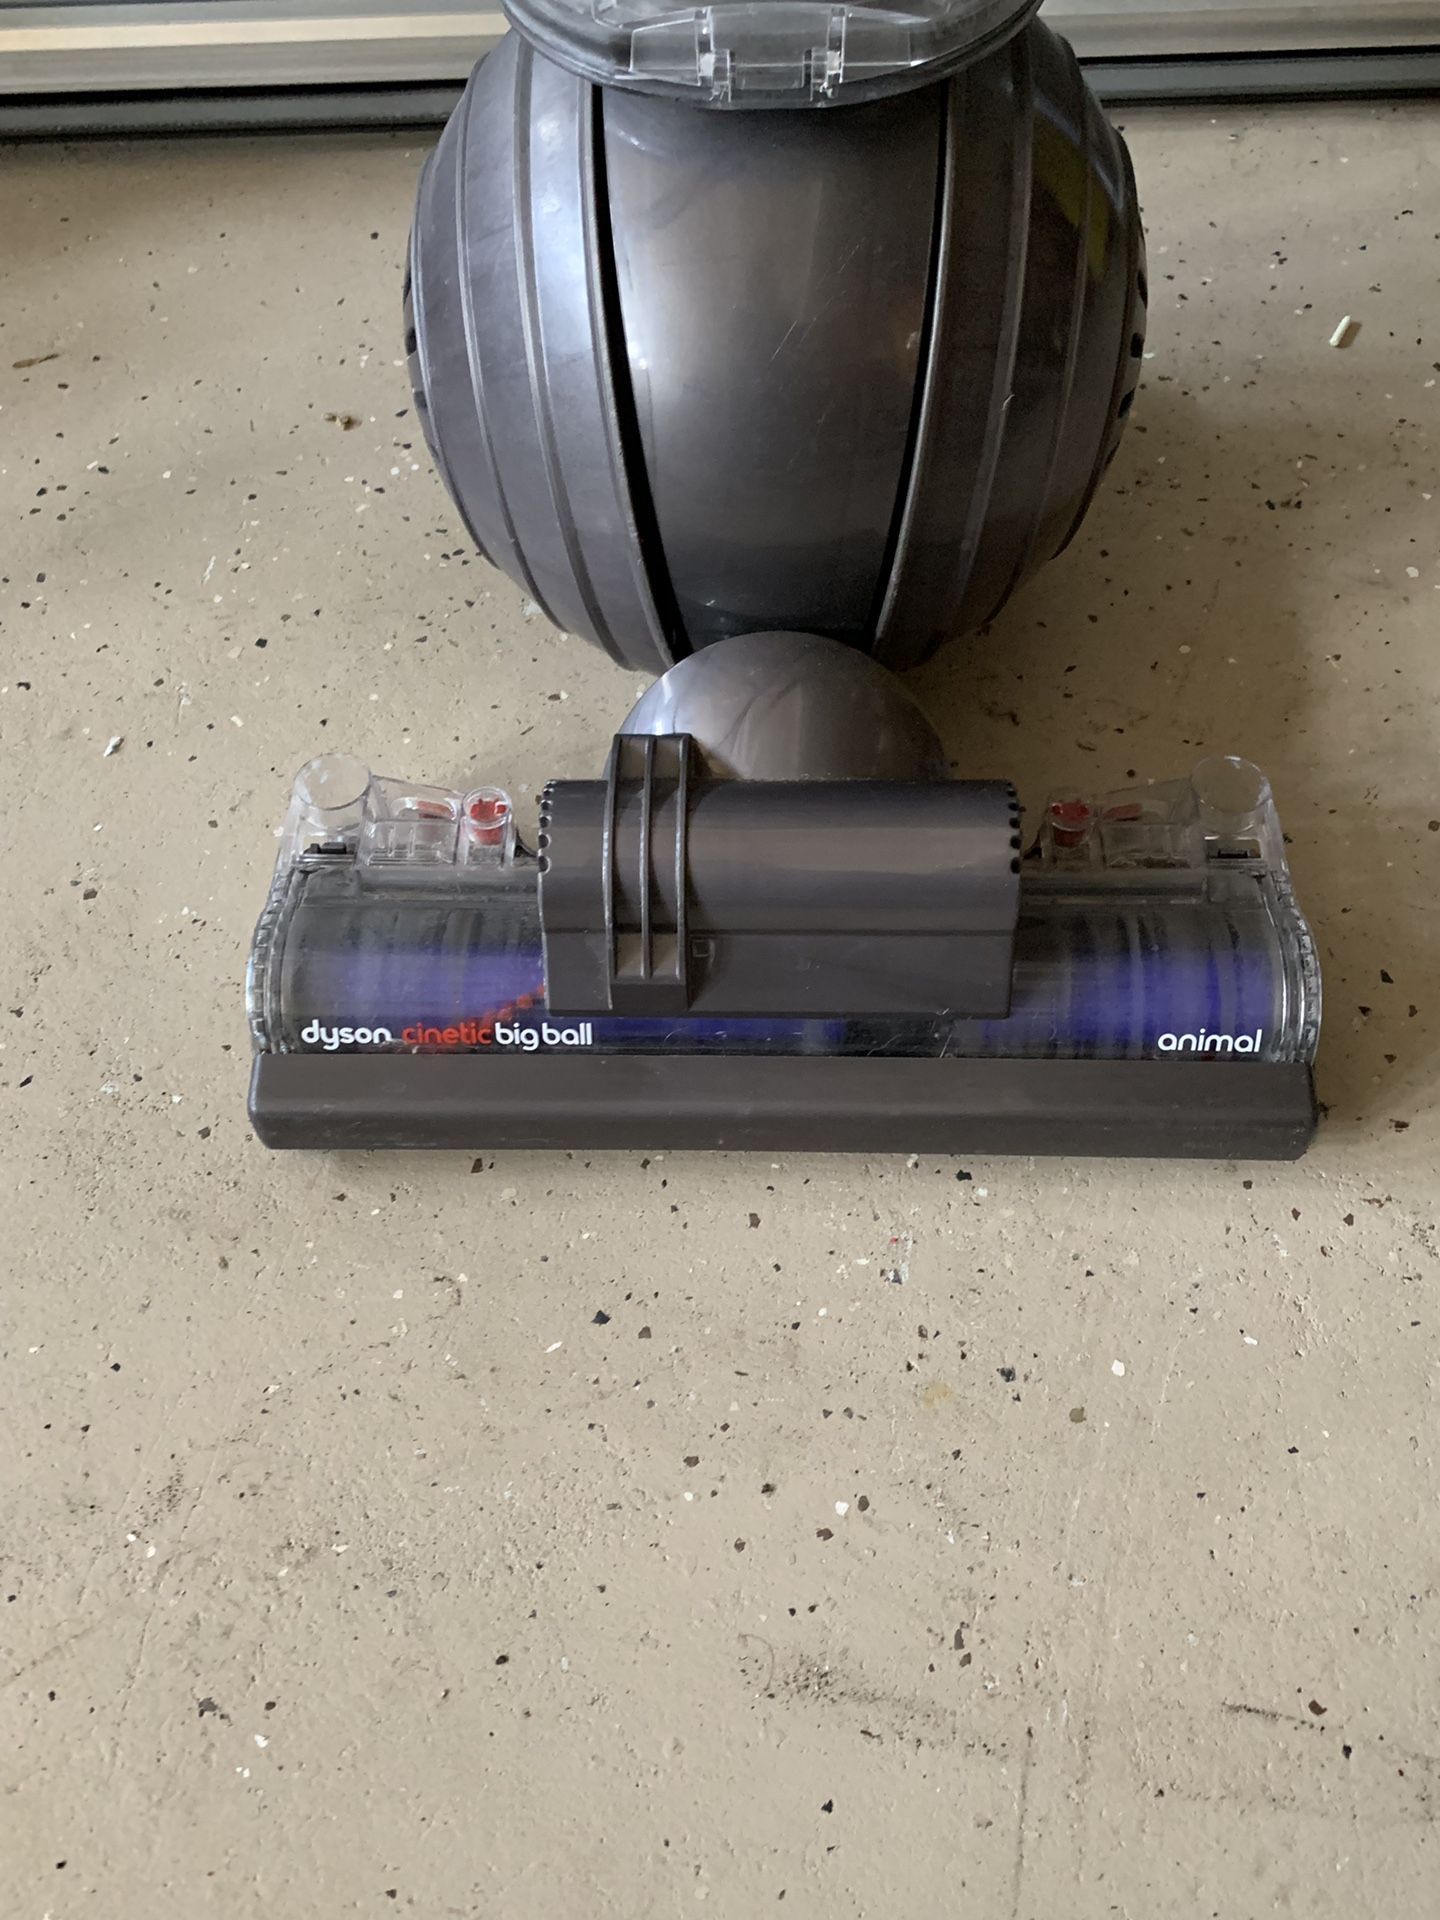 Dyson Ball Animal 2 Bagless Upright Vacuum cleaner